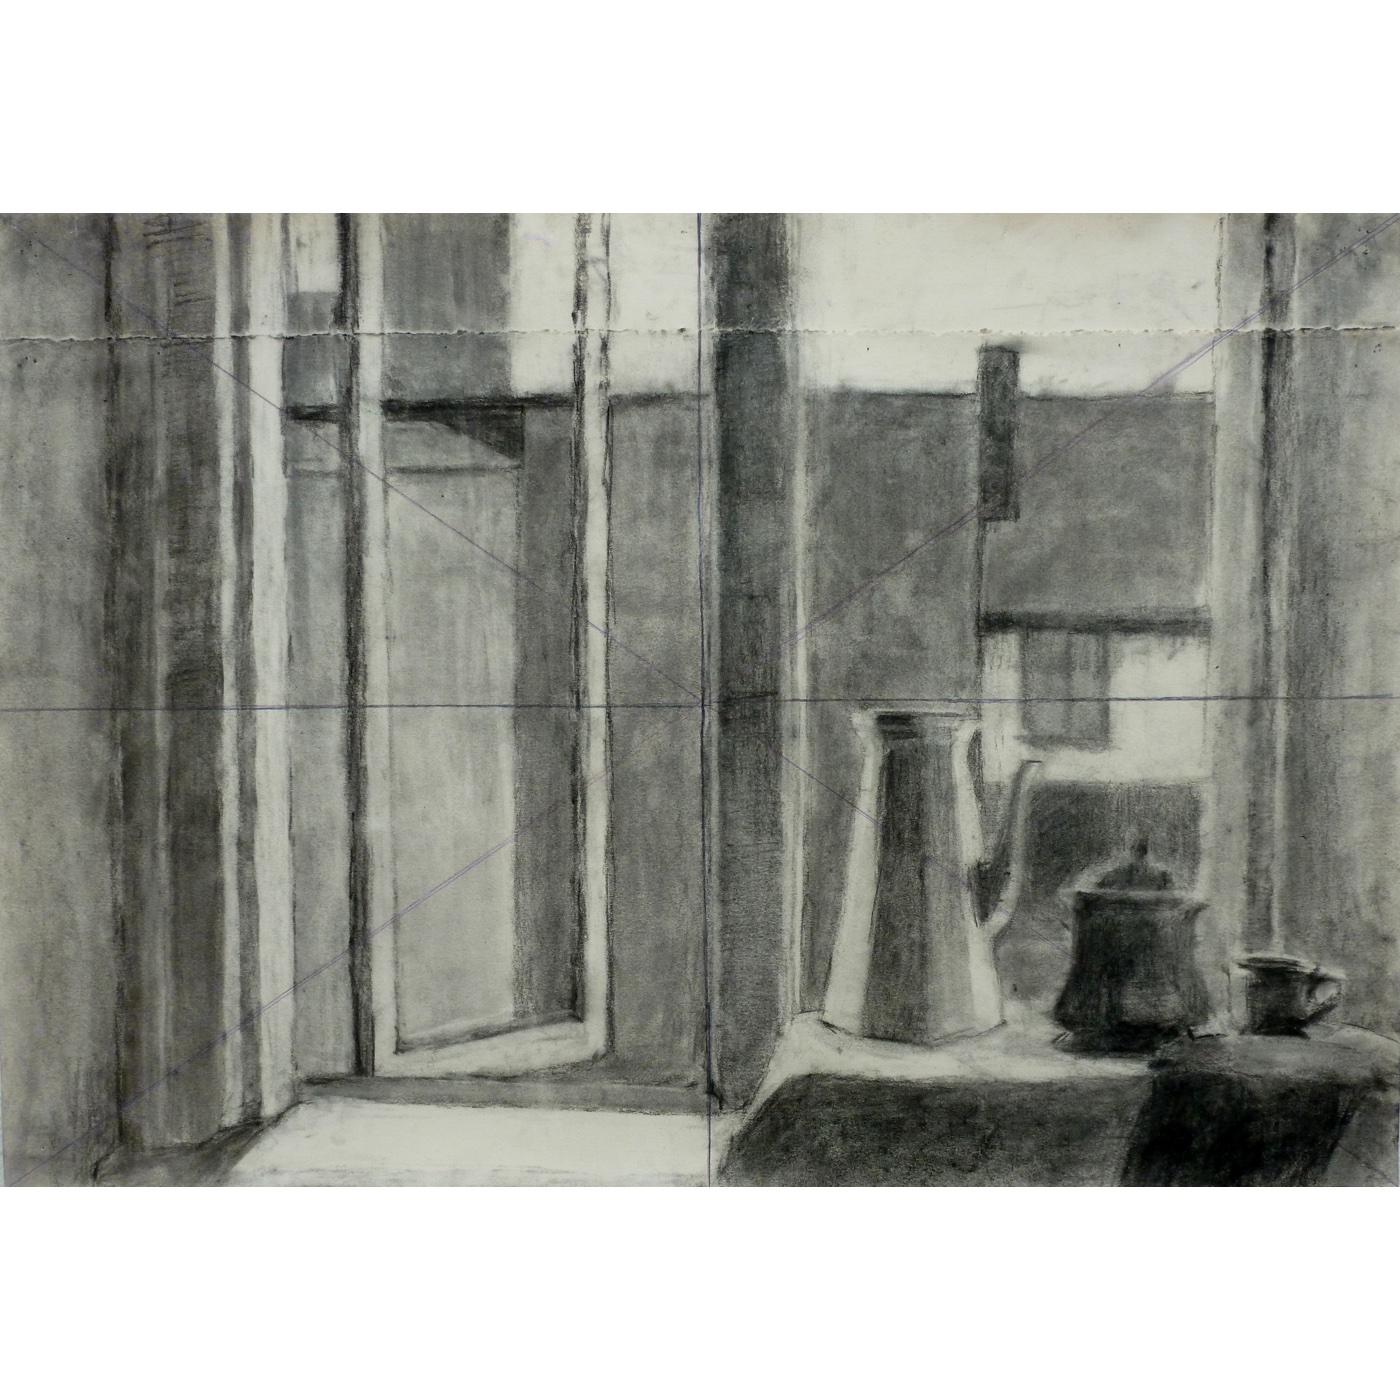 Untitled study for Dreamed Window